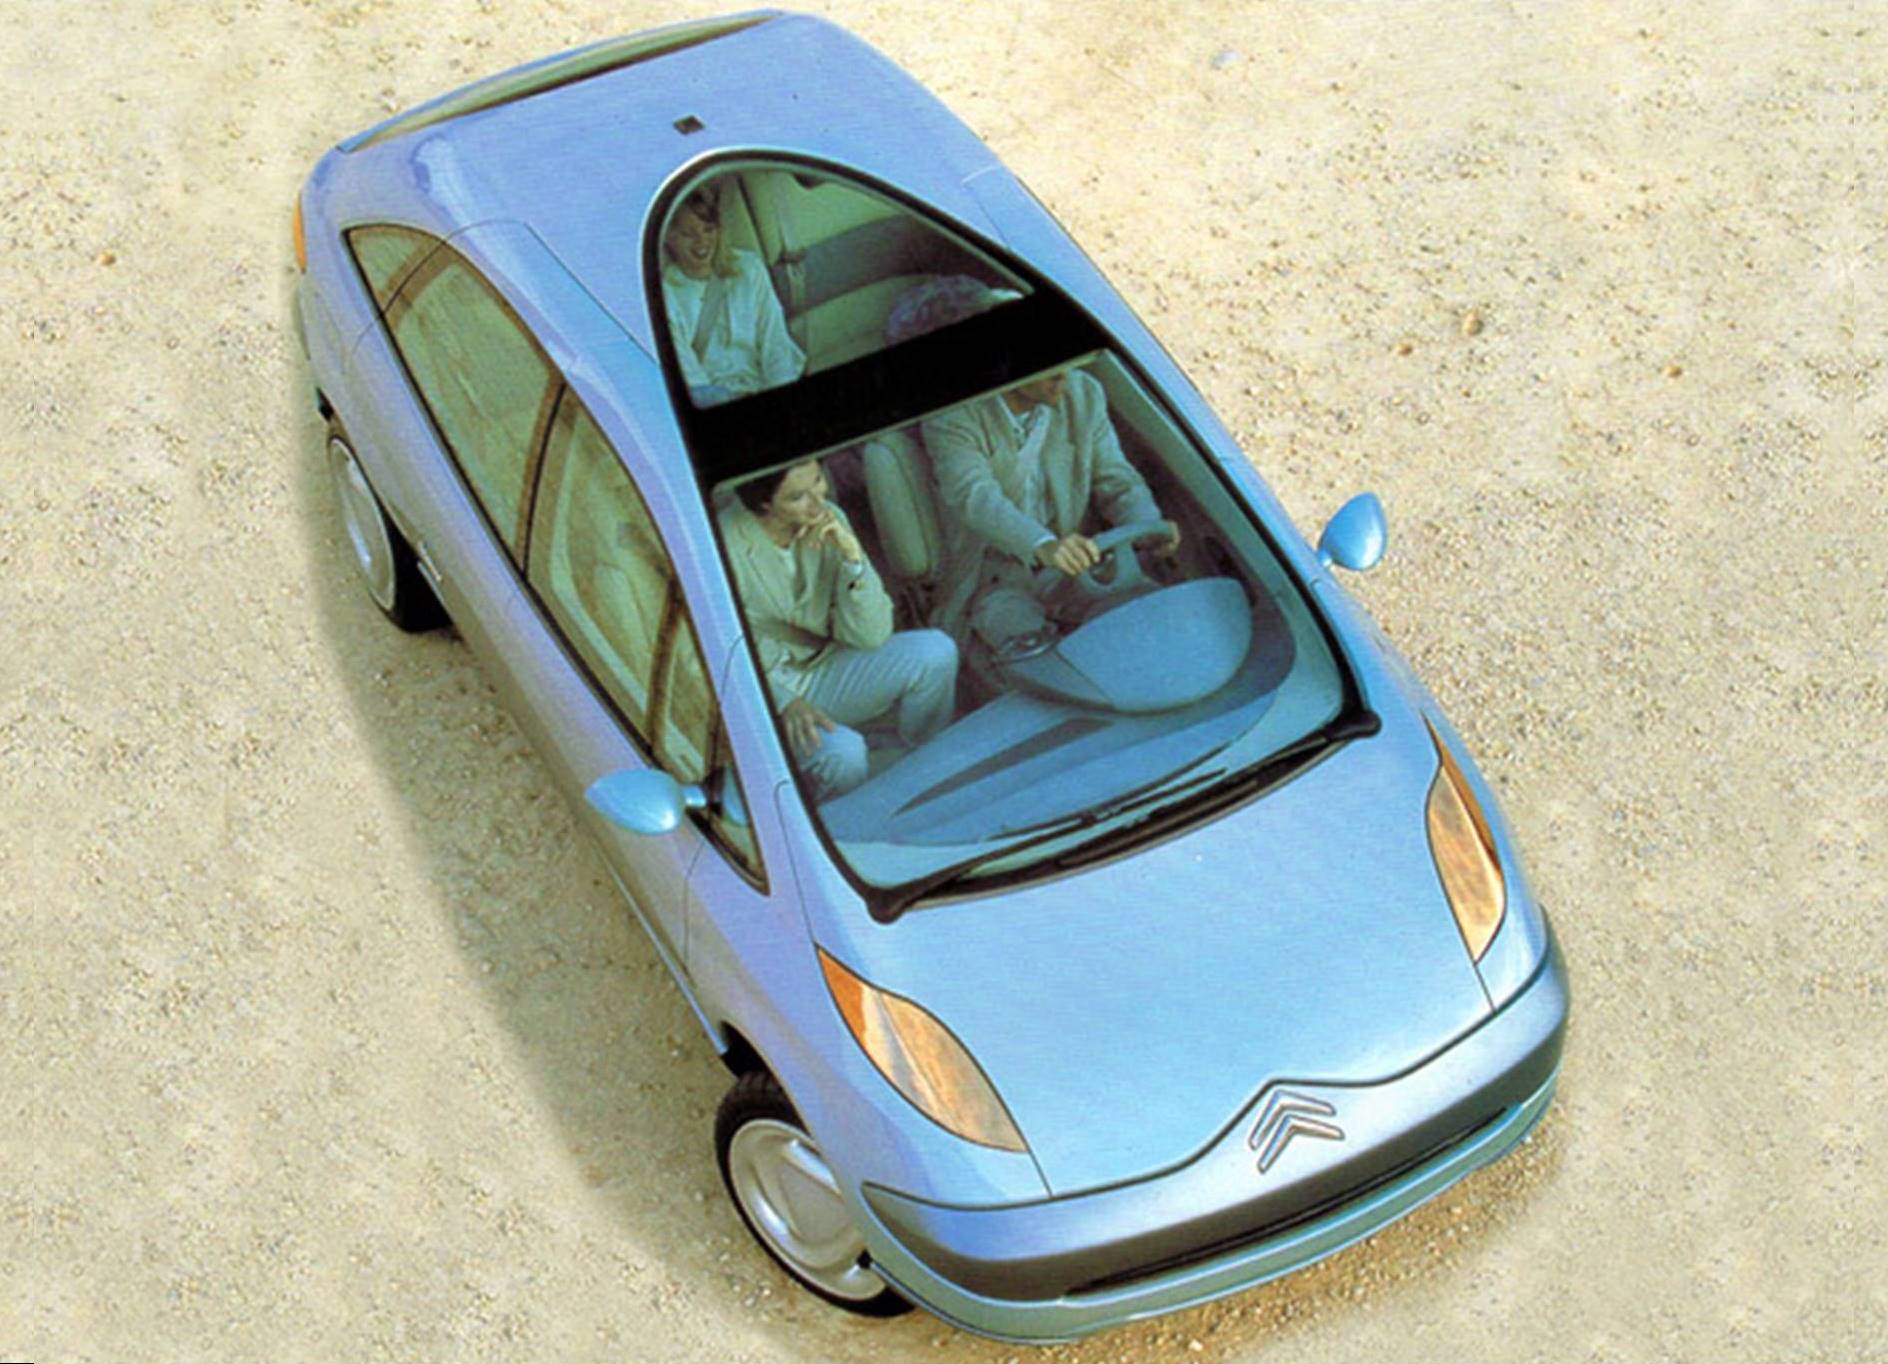 greyish blue car, viewed from above